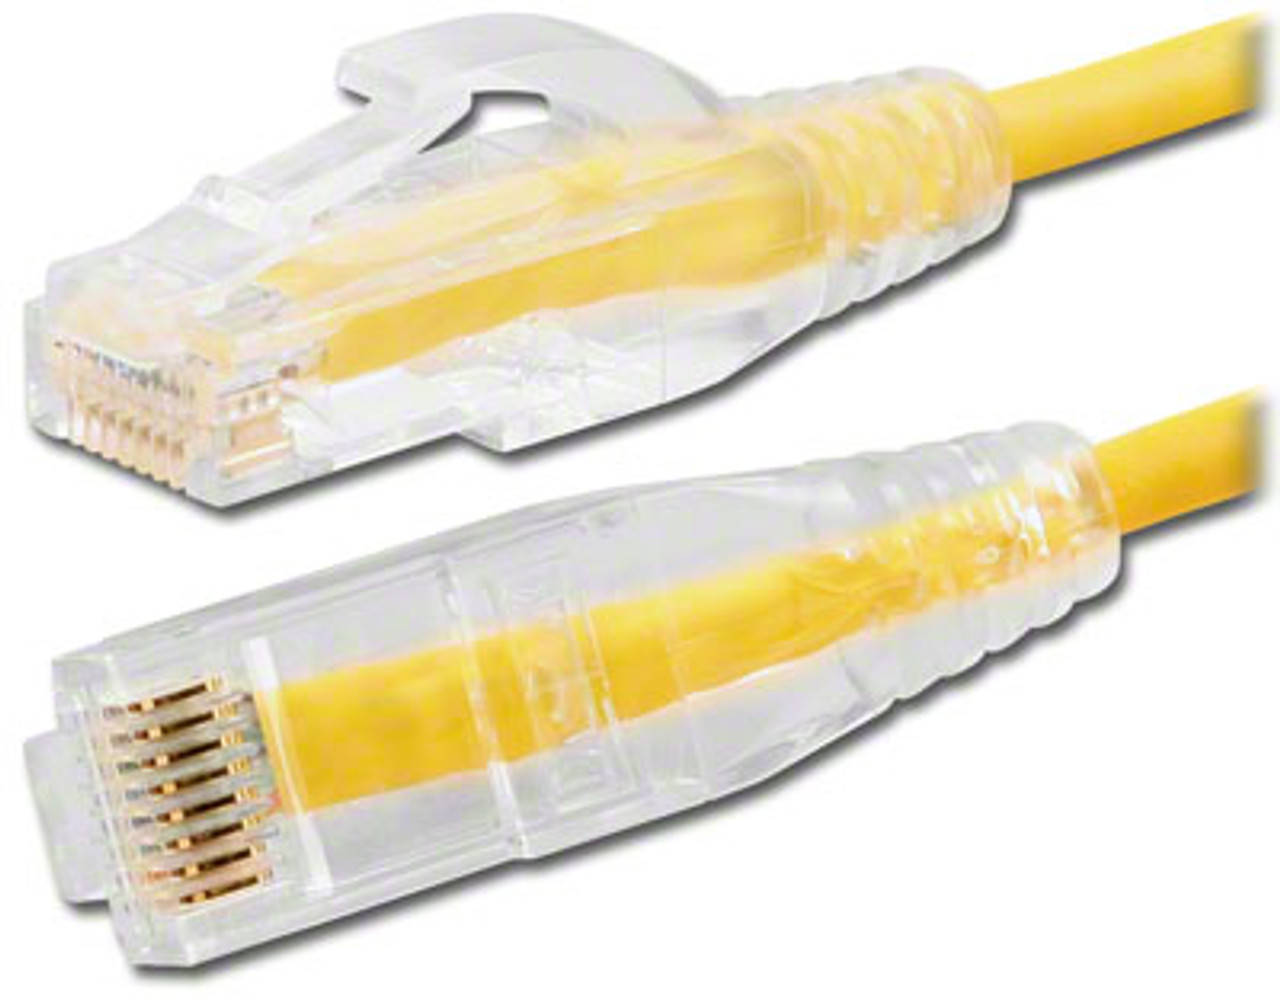 12-FT- Mini Cat 6 Thin Patch Cable - Yellow Jacket - DC-56NP-12YWTB - TMB